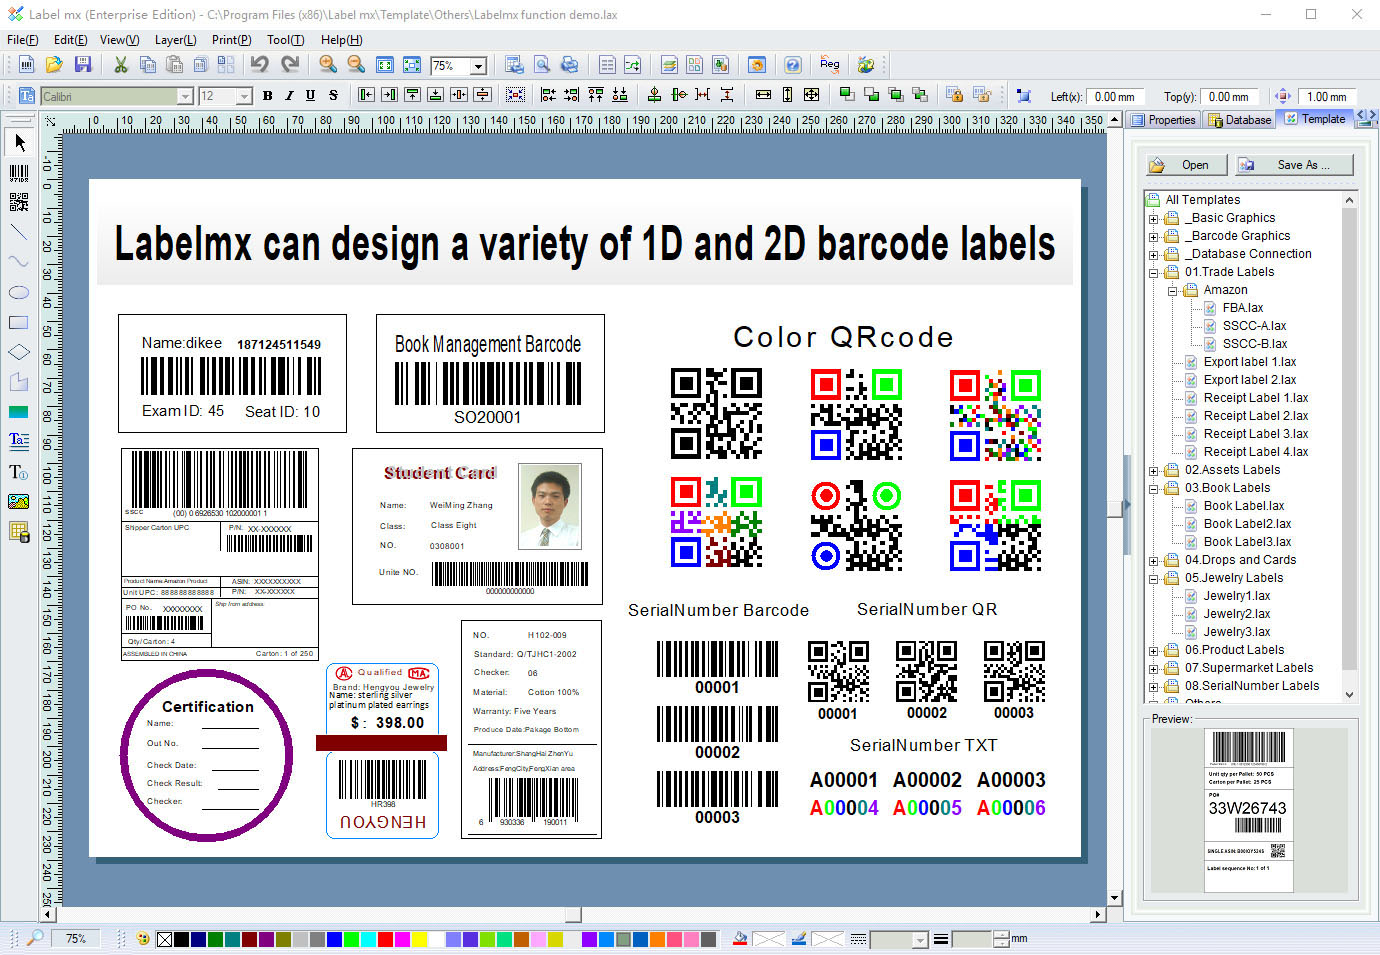 Label mx barcode software